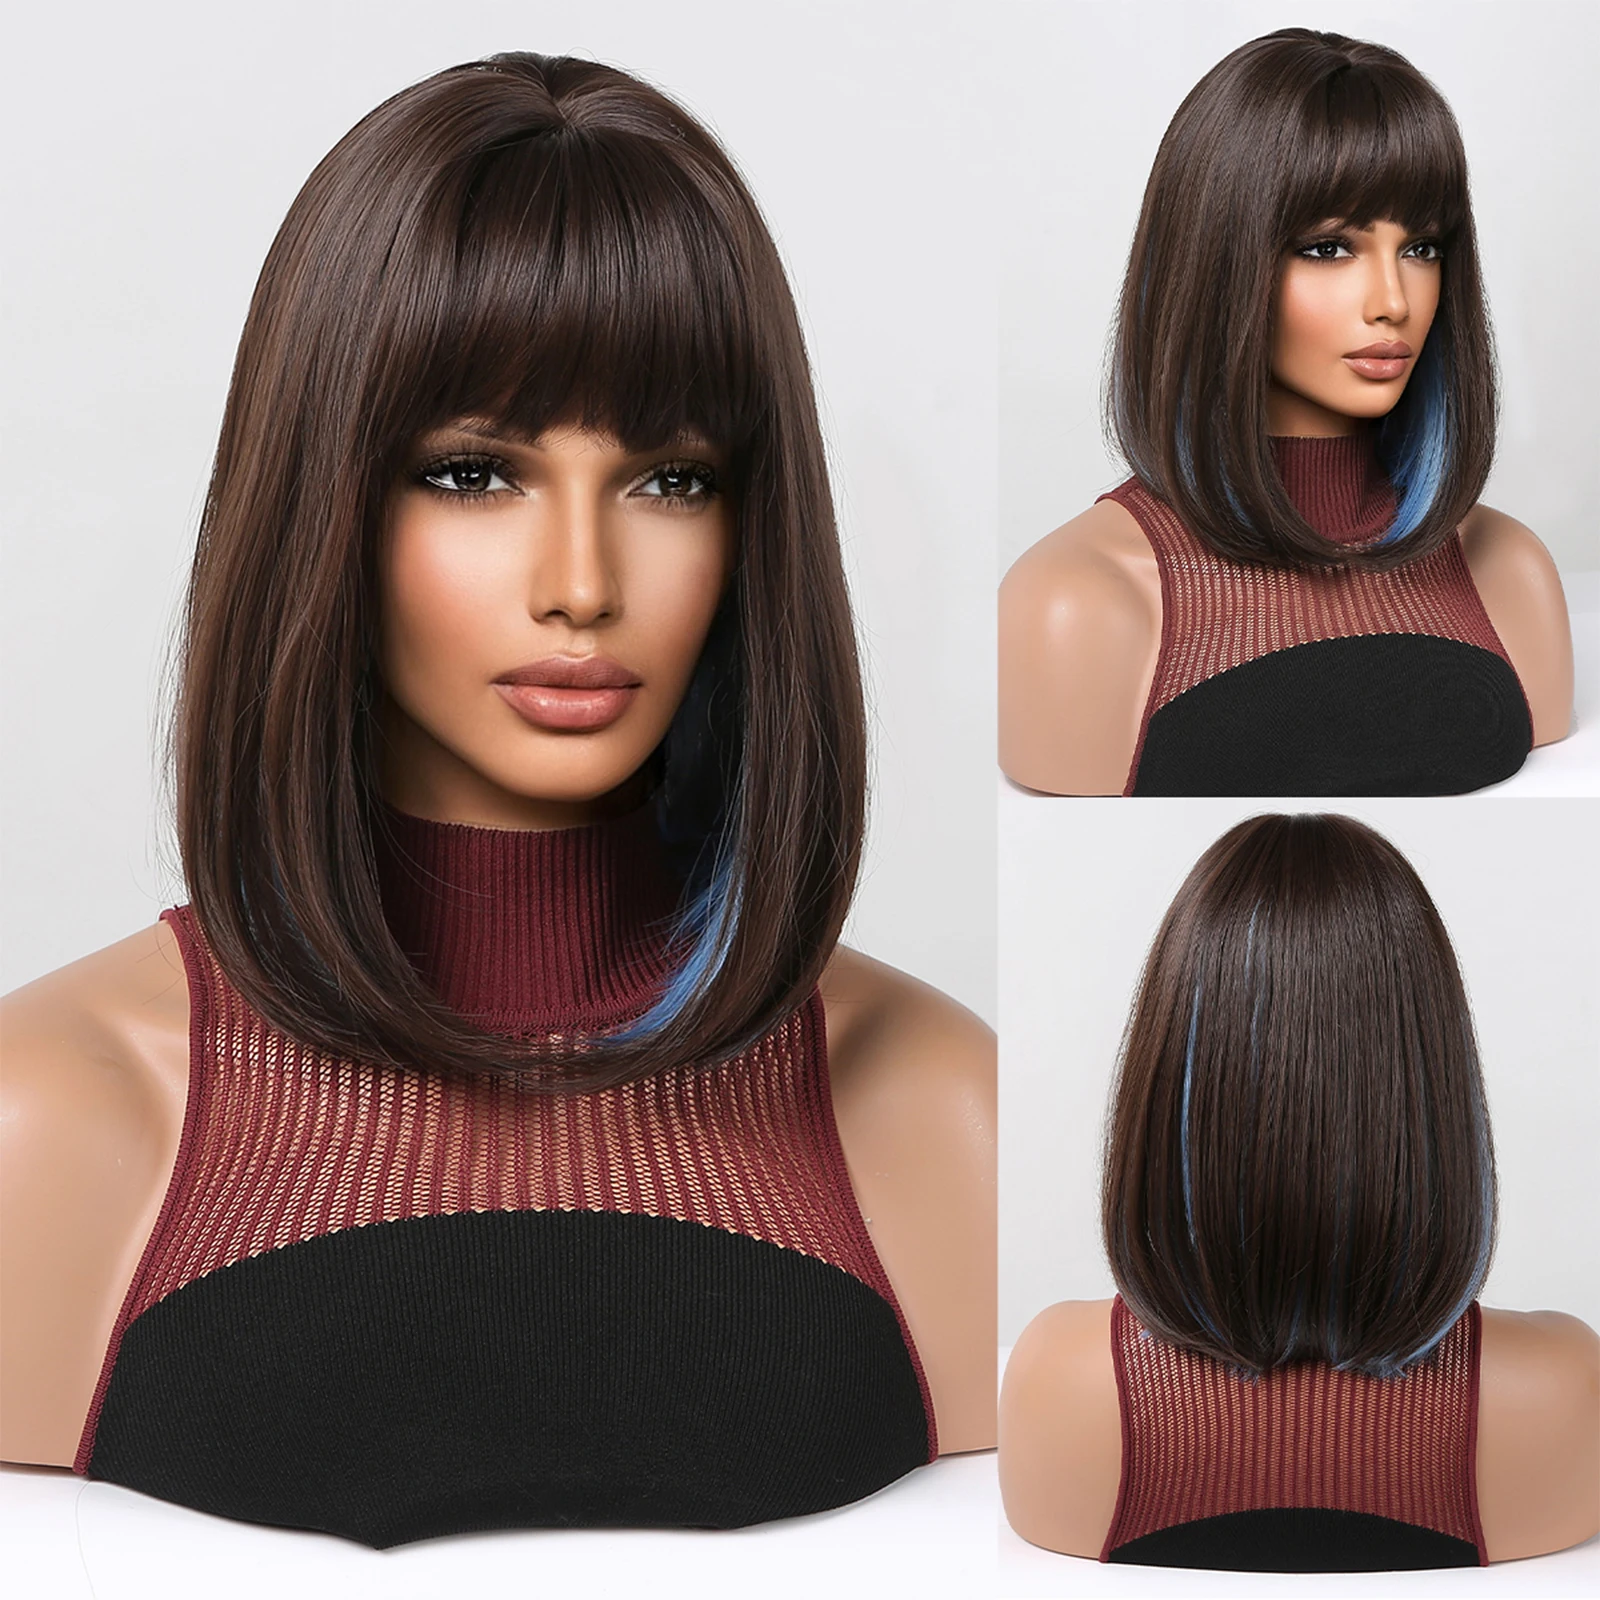 EASIHAIR Bob Synthetic Brown Wigs for Women Short Straight Hair Blue Highlights Bangs Wig Female Cosplay Party Heat Resistant